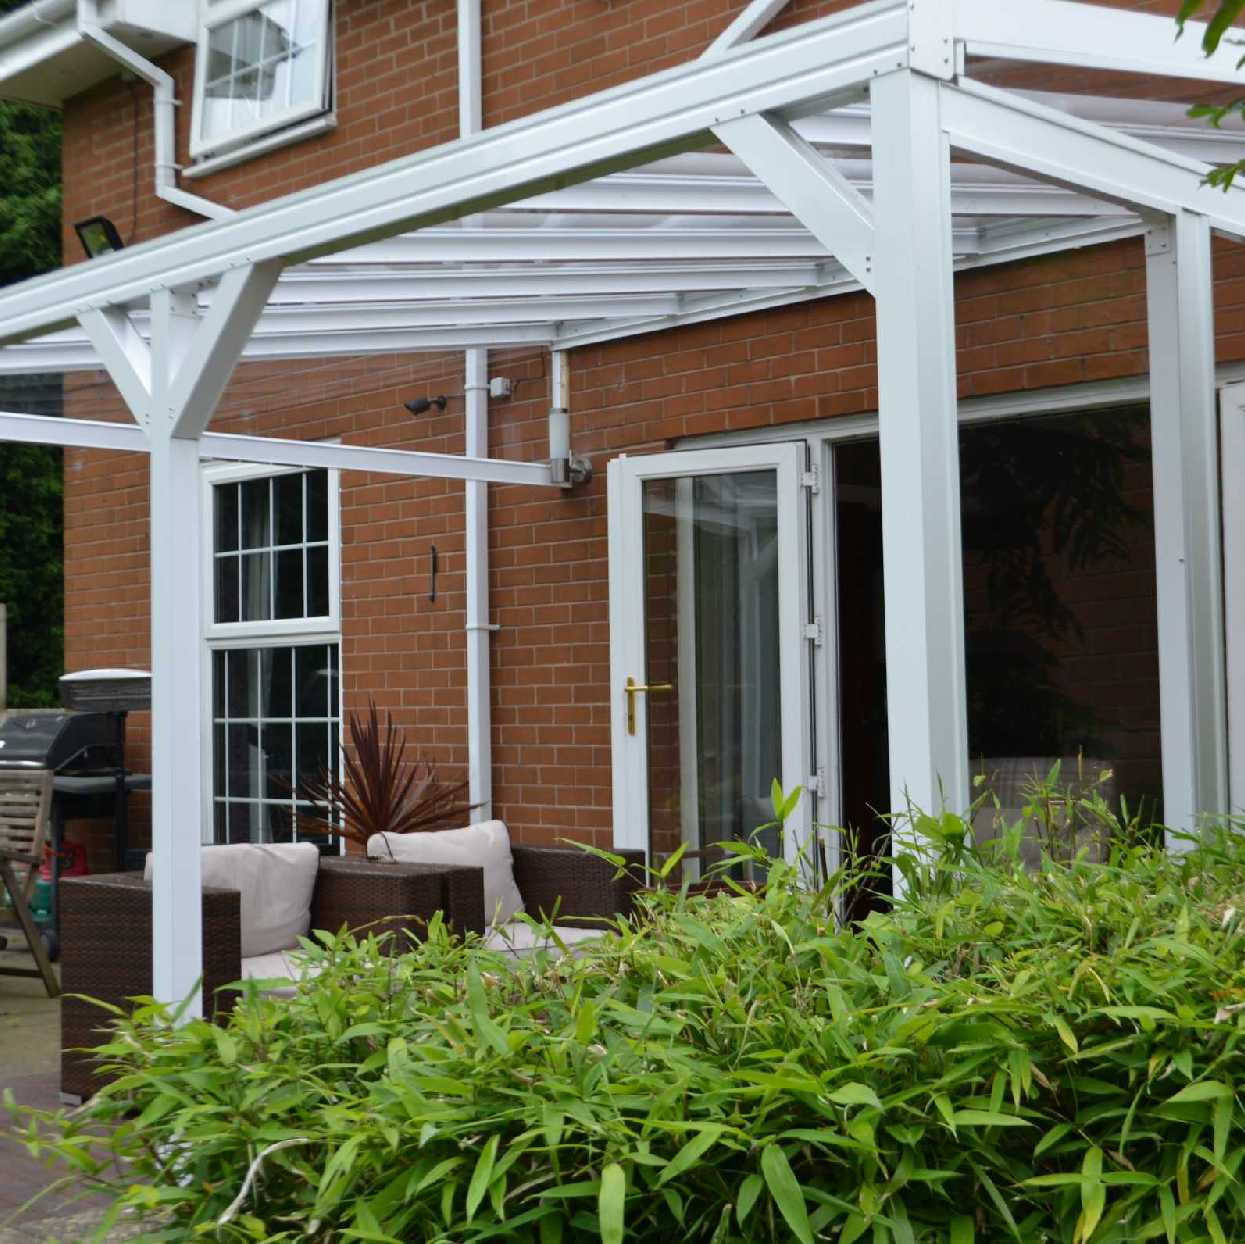 Omega Smart Lean-To Canopy, White UNGLAZED for 6mm Glazing - 9.1m (W) x 2.5m (P), (5) Supporting Posts from Omega Build